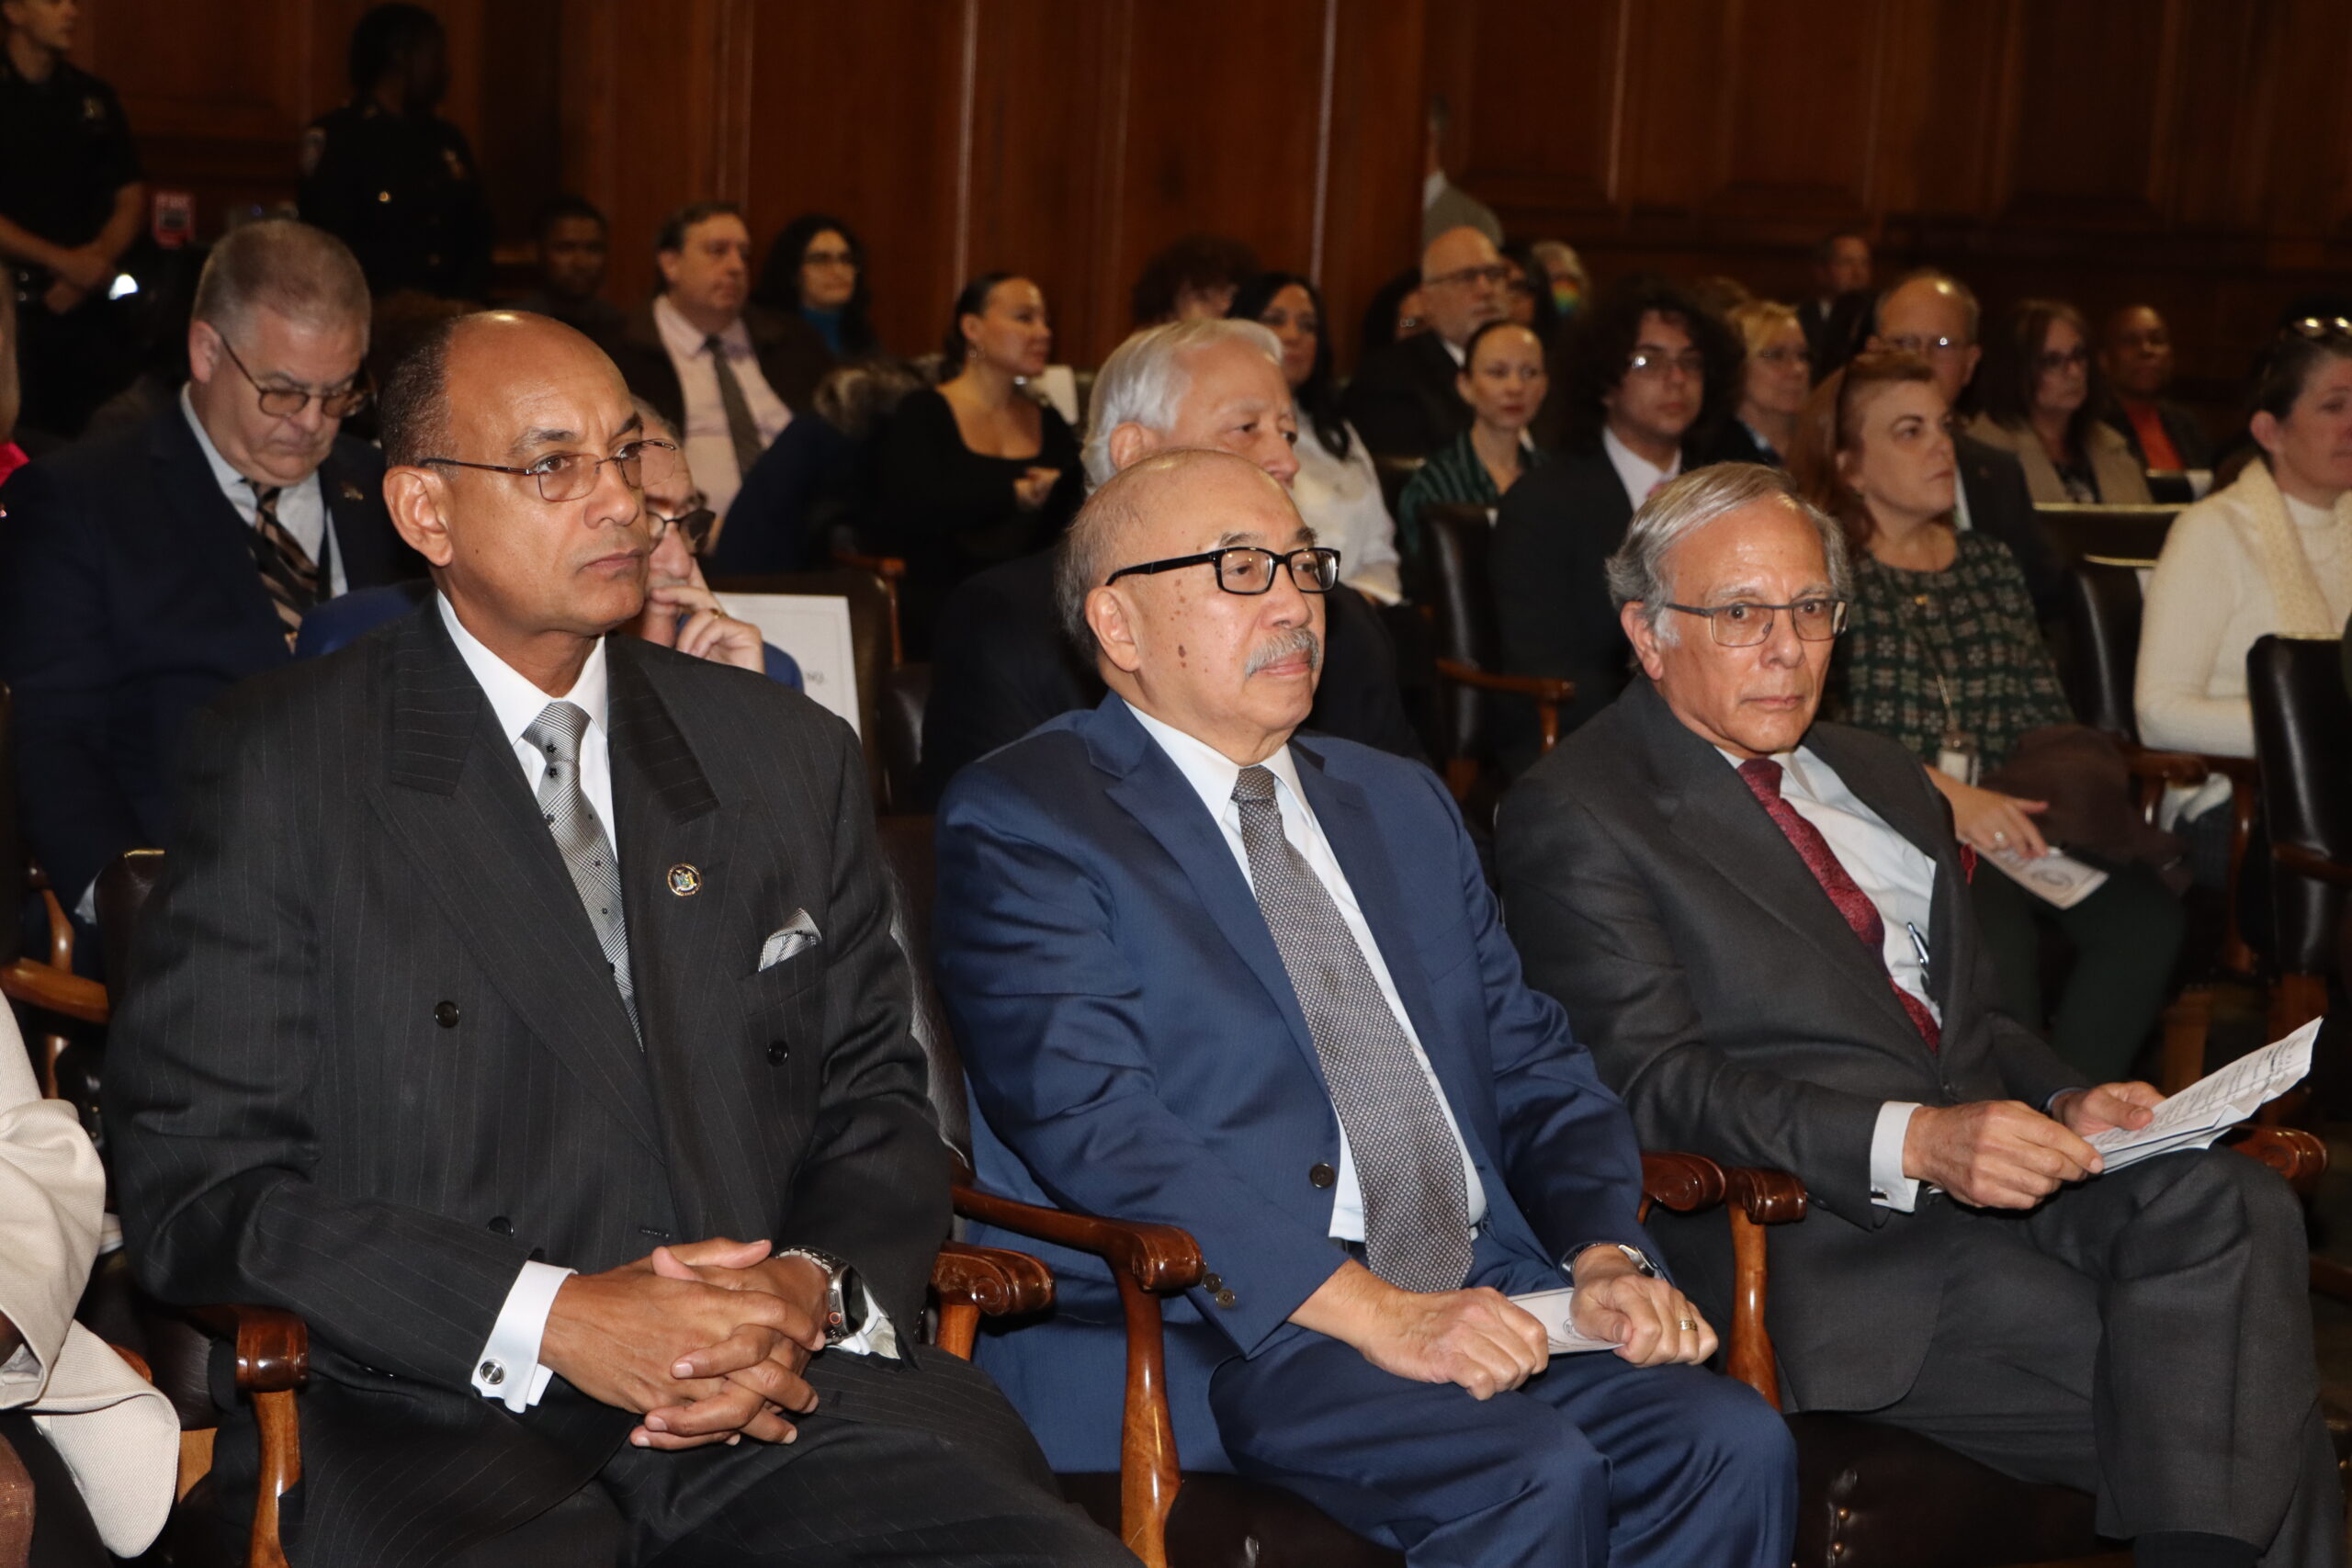 With a front row seat, from left to right, Hon. Norman St. George, former Presiding Justice Randall Eng and Scott Mollen at Milton Mollen Commitment.